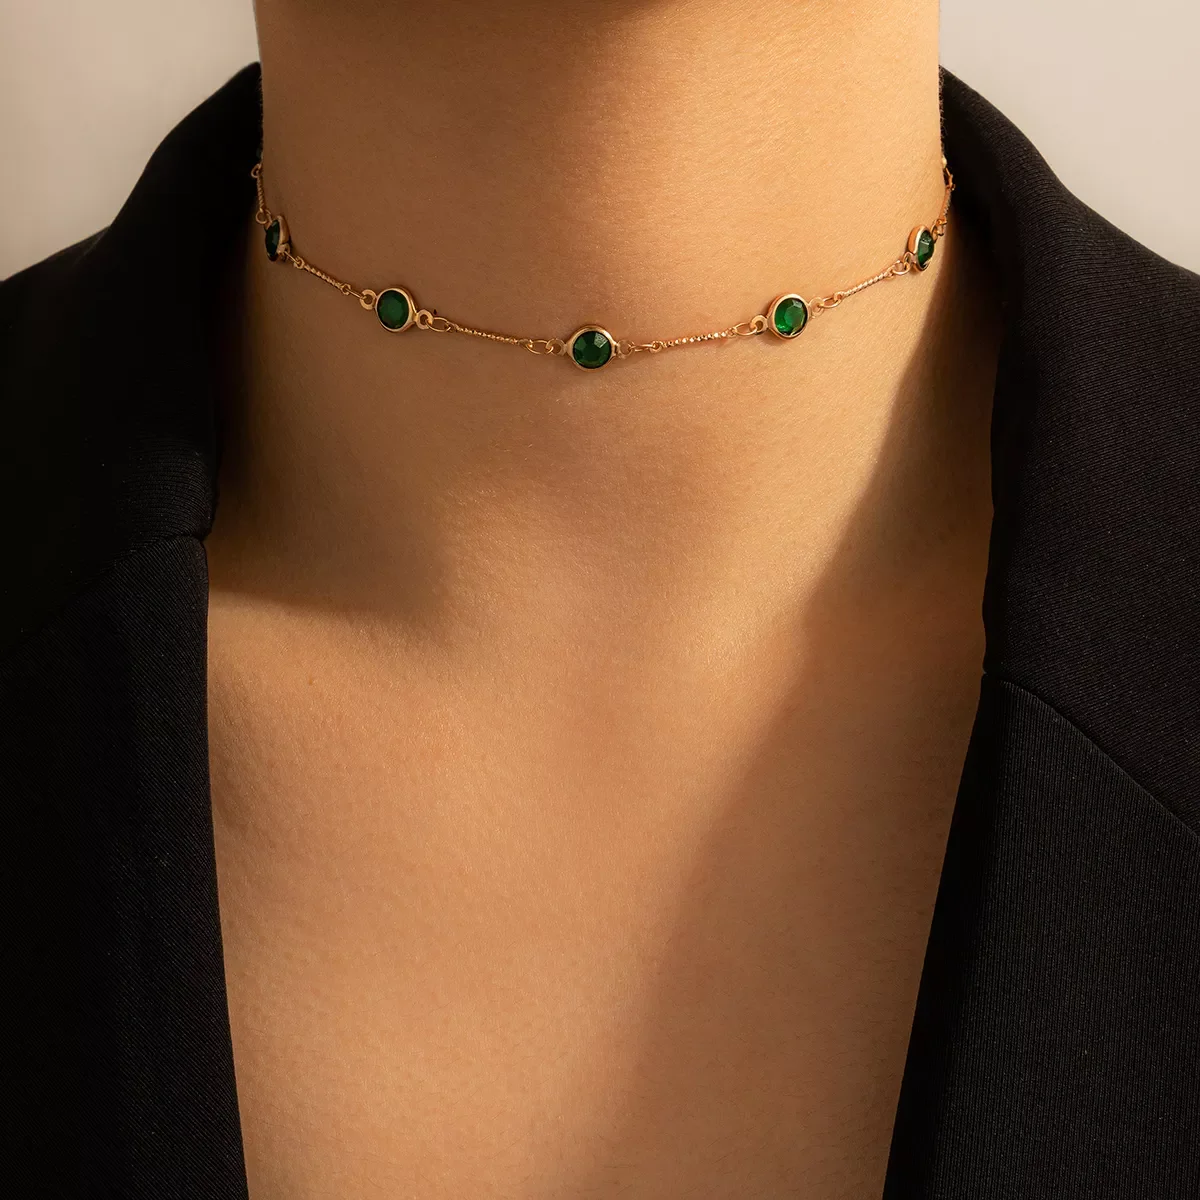 

Tredny Green Rhinestone Chain Choker Necklace for Women Gold Color Alloy Metal Handmade Jewelry Accessories Collar 15633